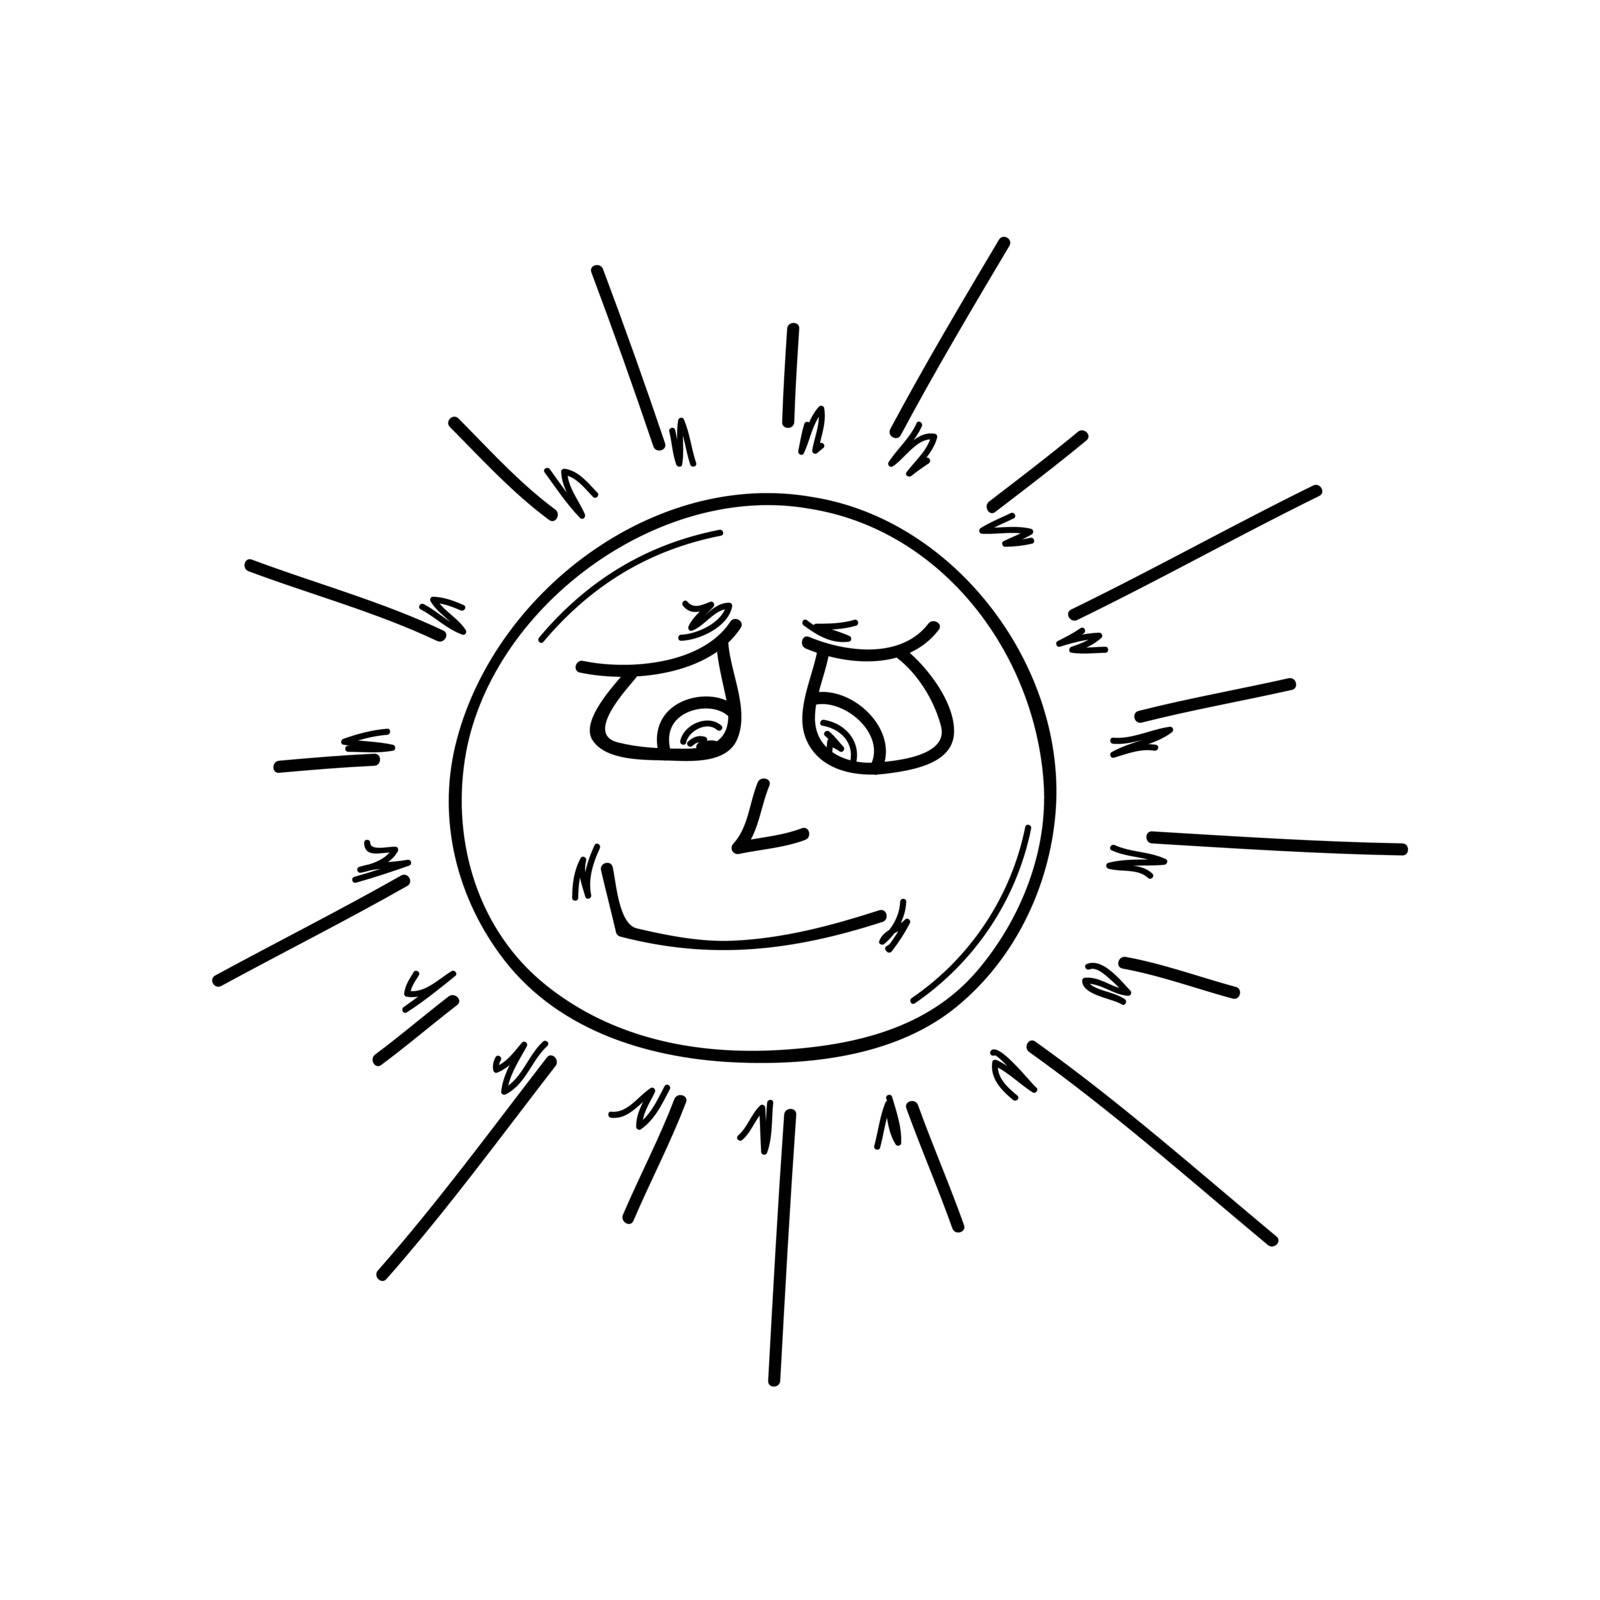 smiling sun on white background, isolated, vector